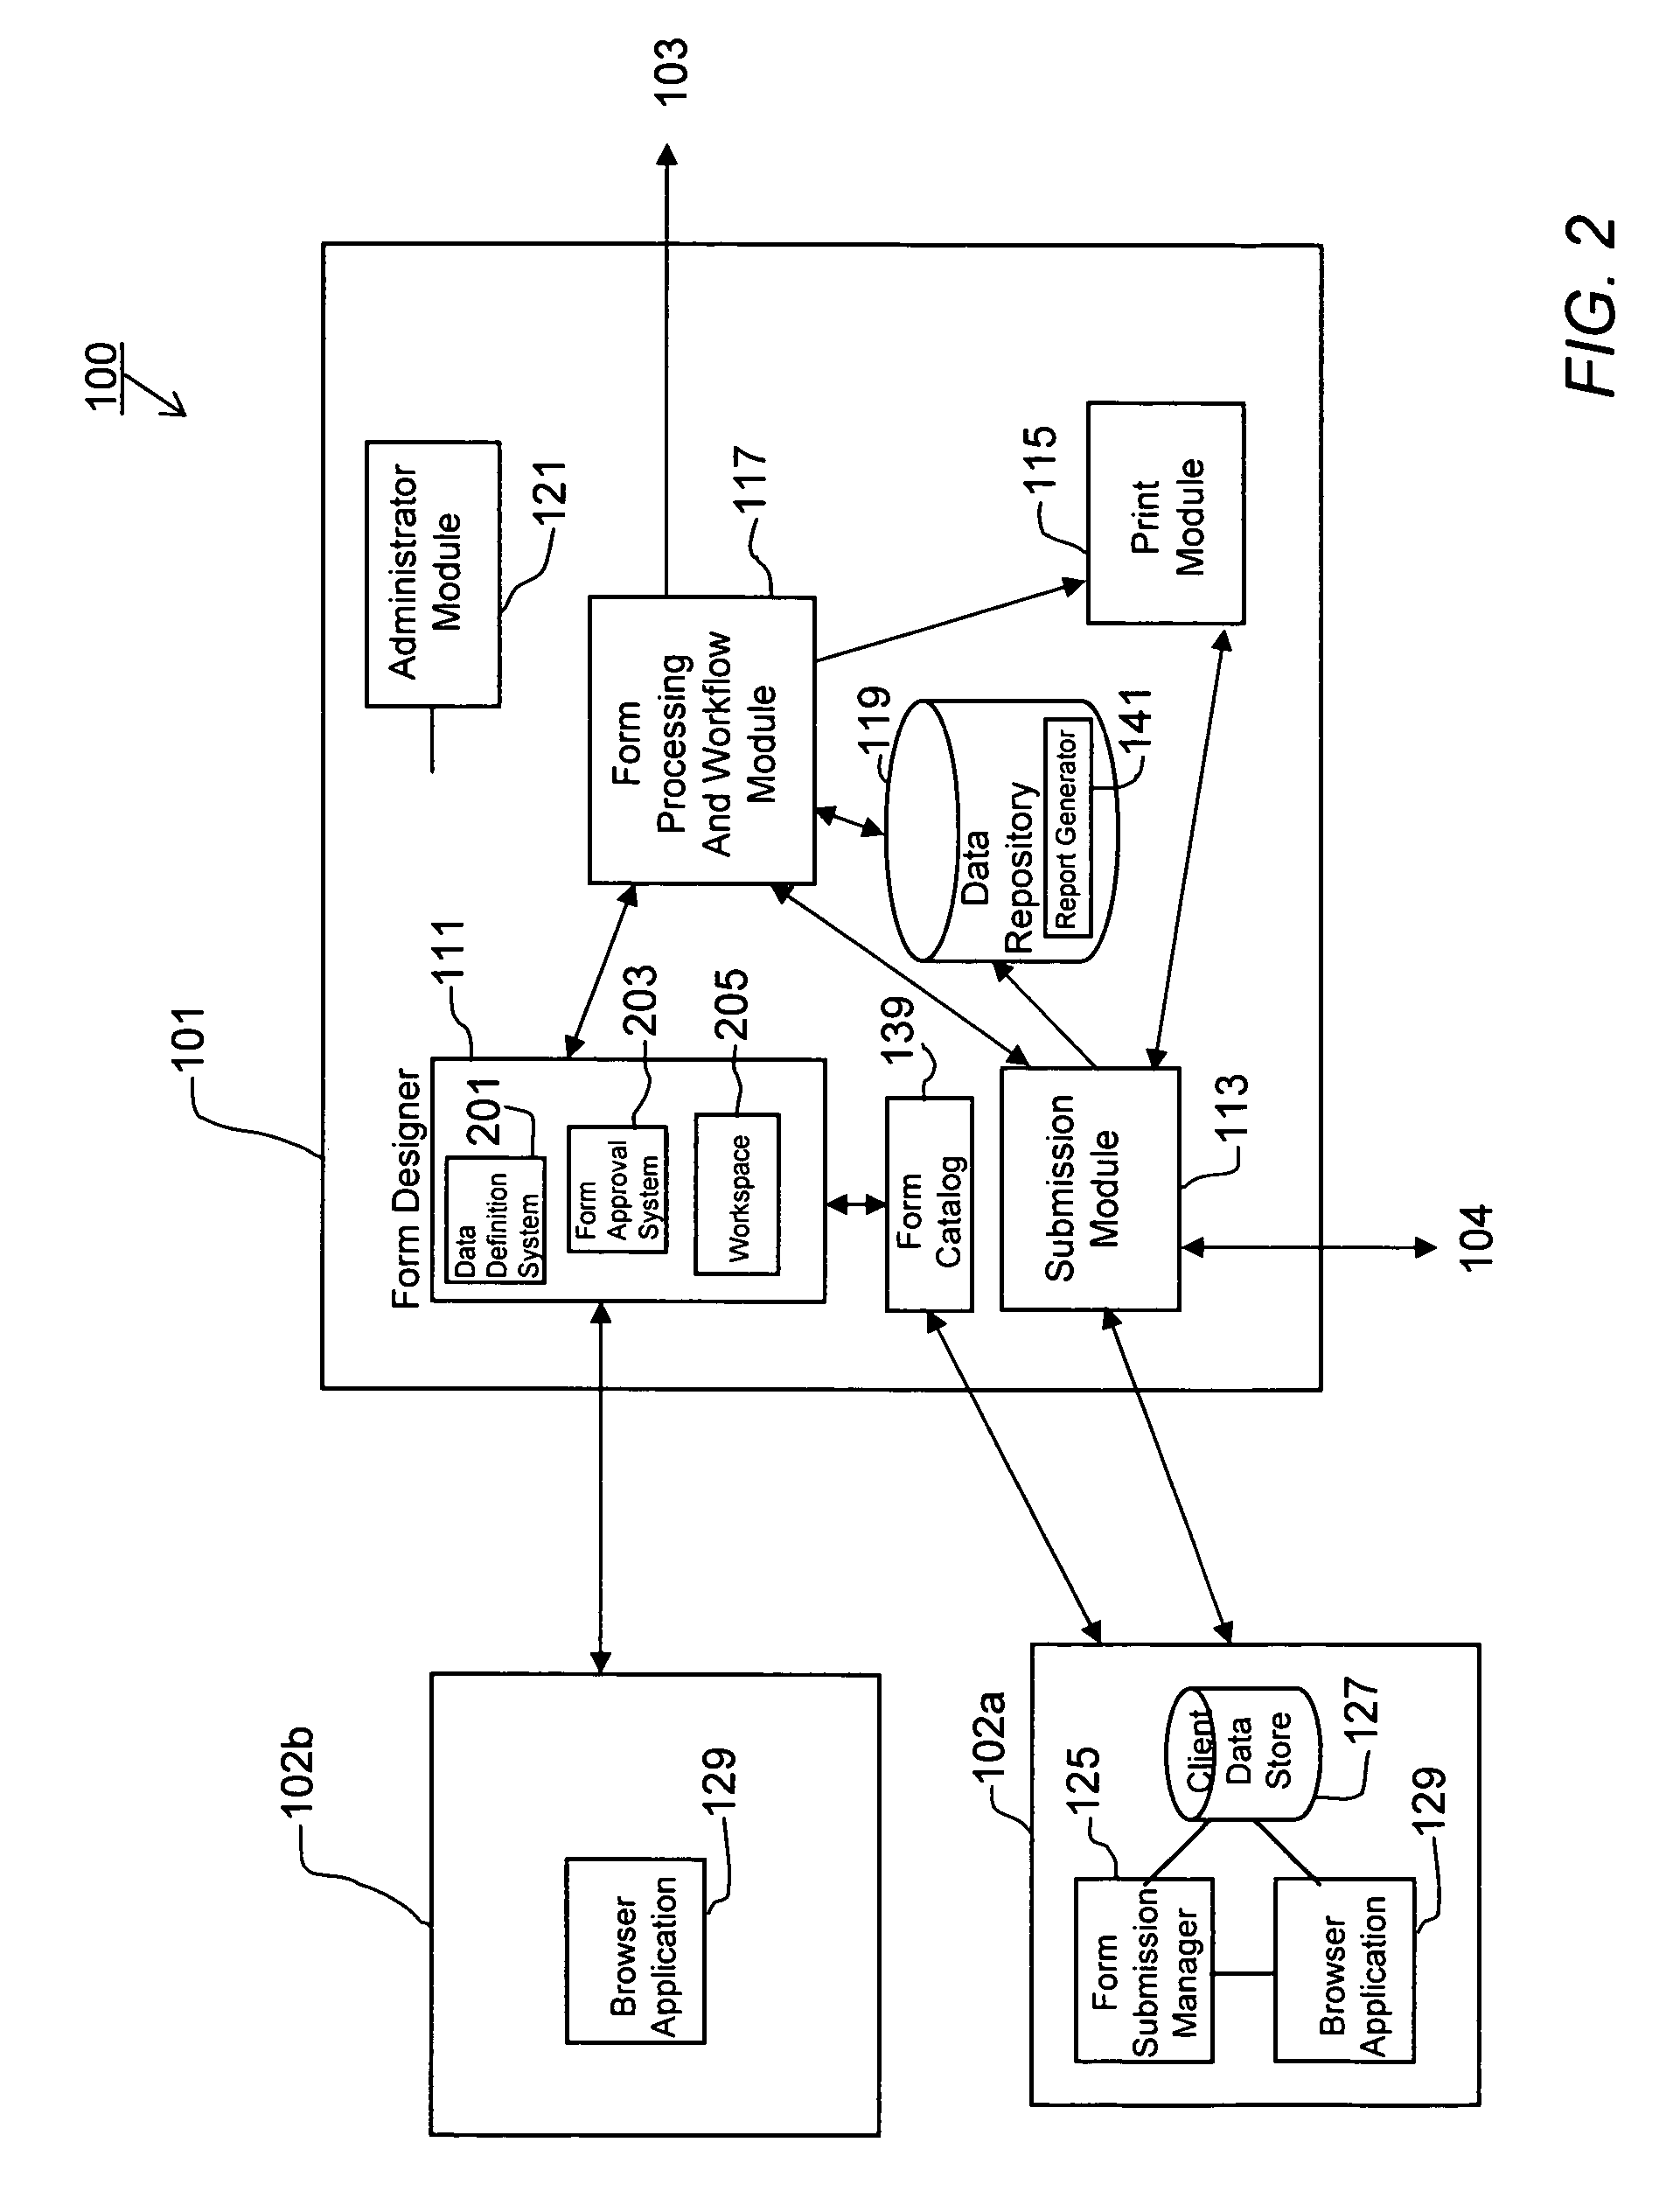 Data collection and processing system and methods